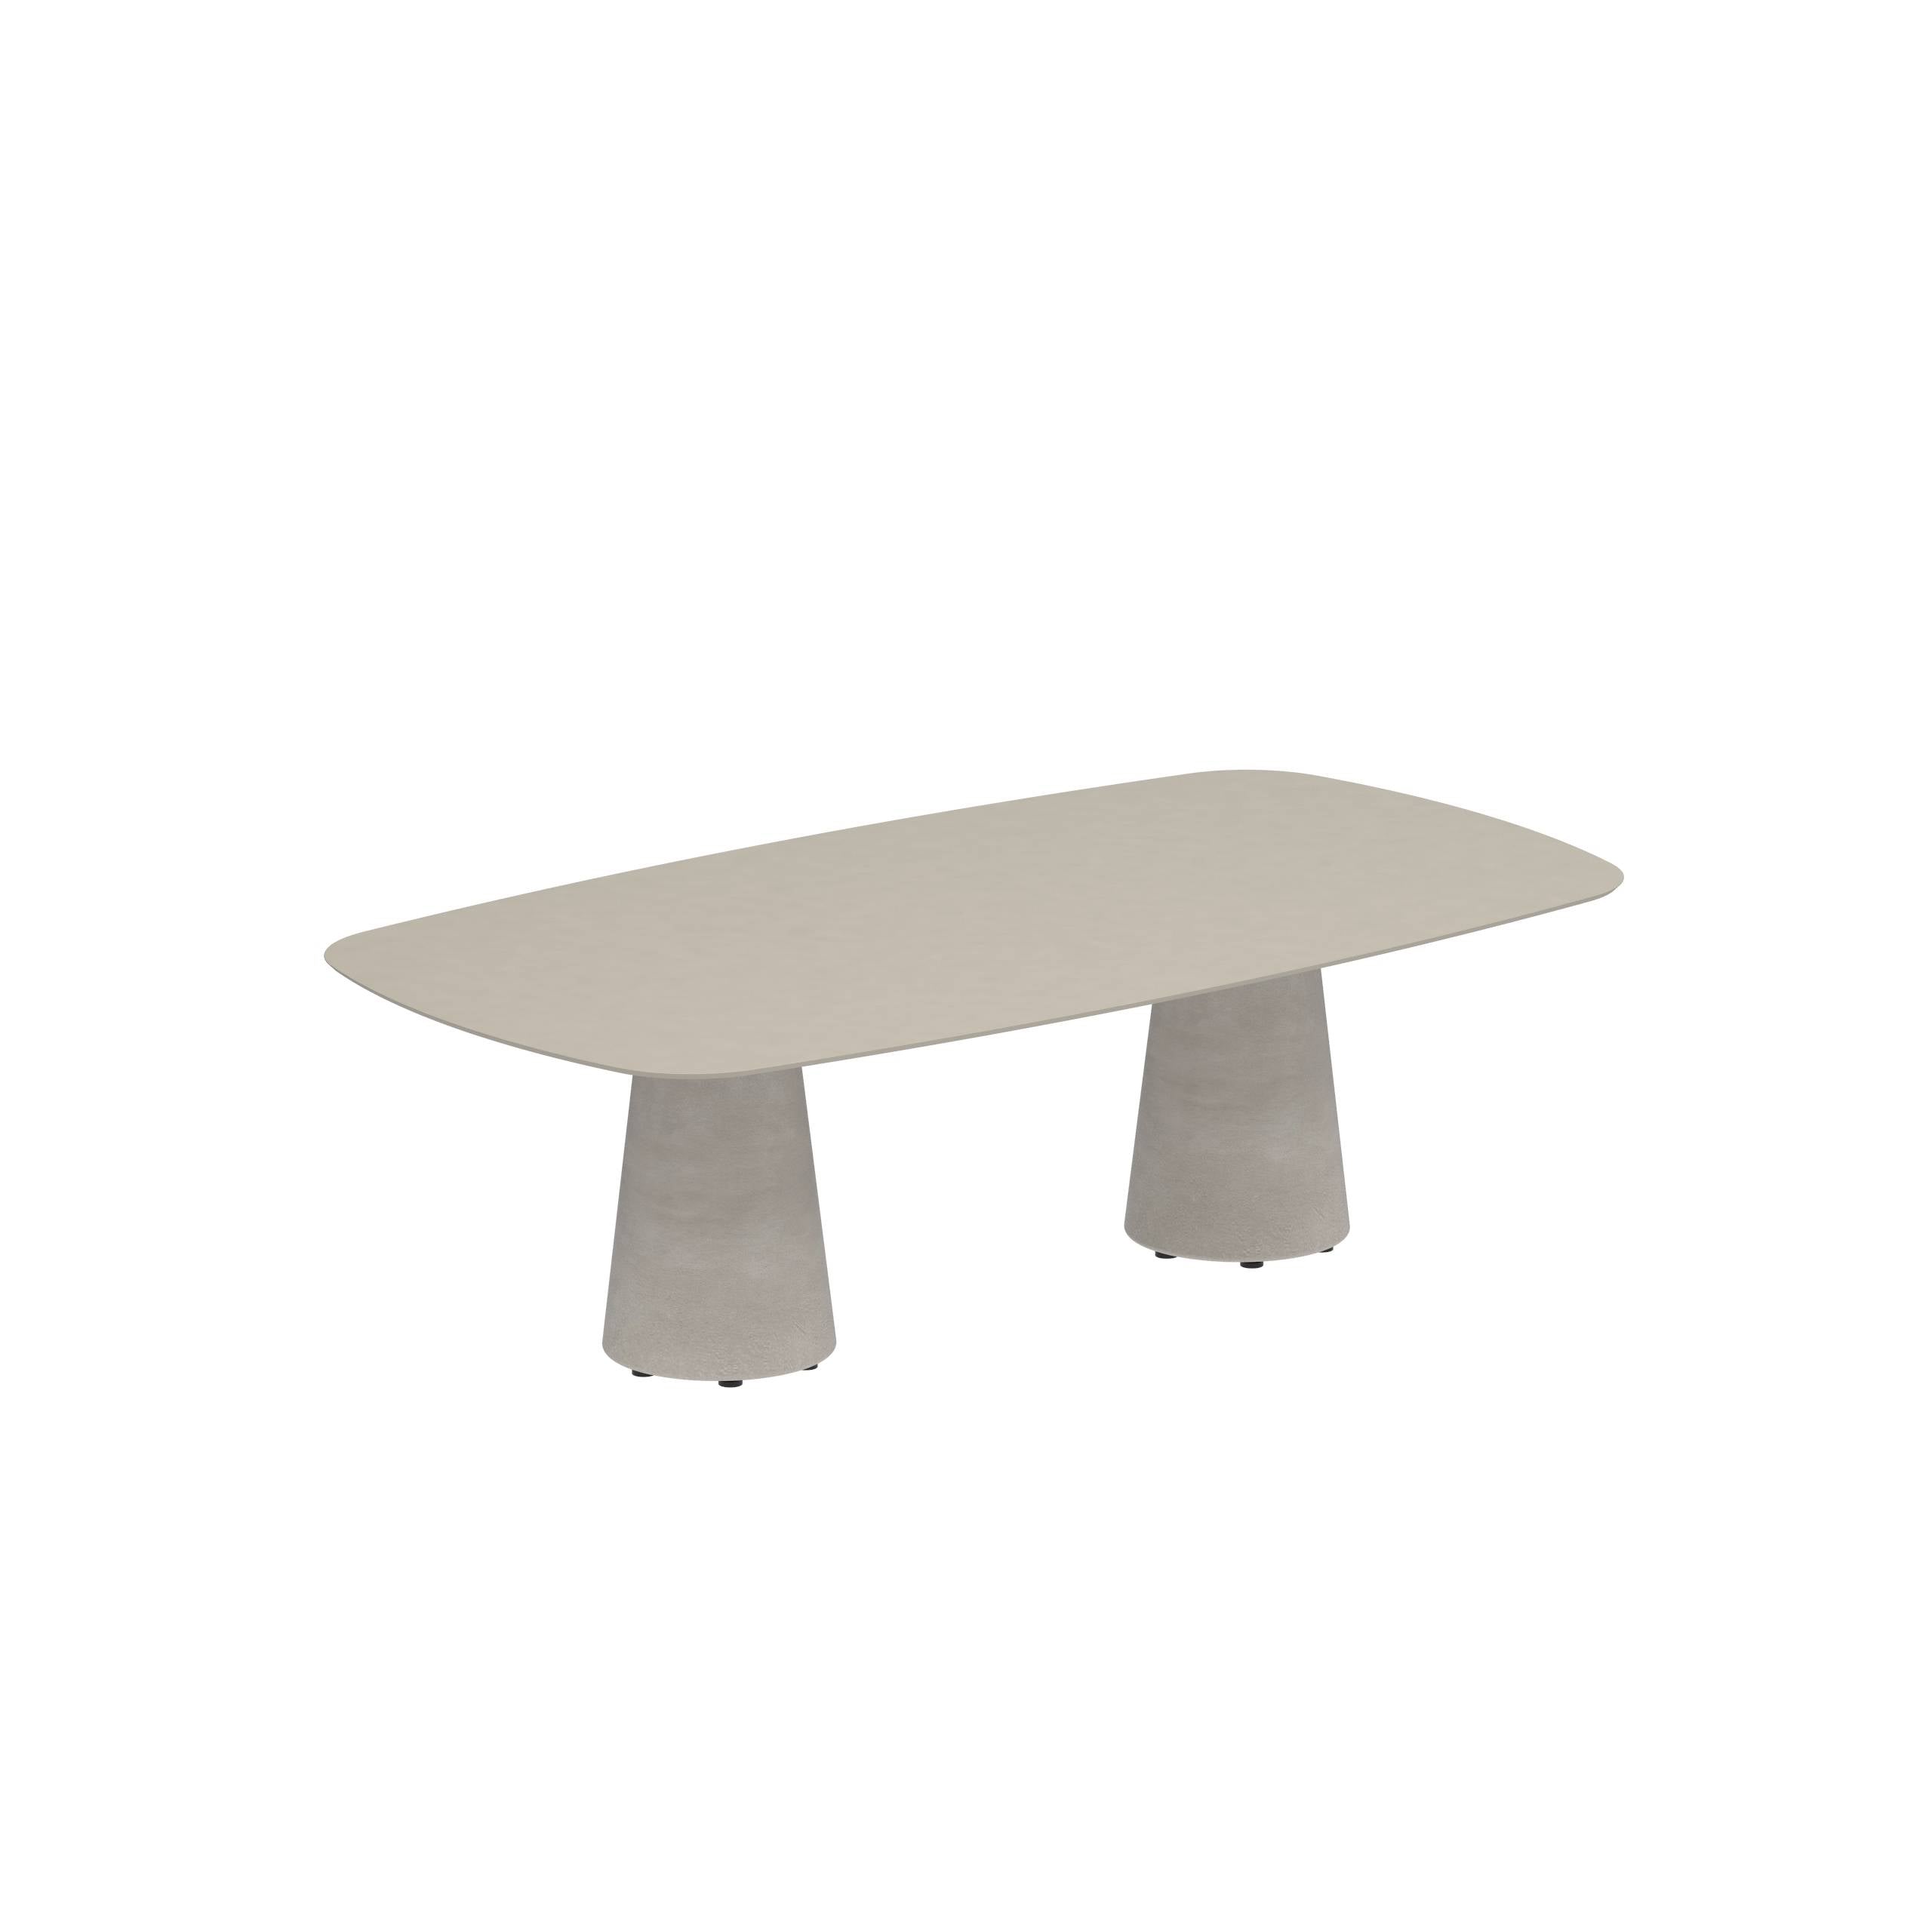 Conix Table 220x120 Cm Low Dining Legs Concrete Cement Grey - Table Top Ceramic Pearl Grey